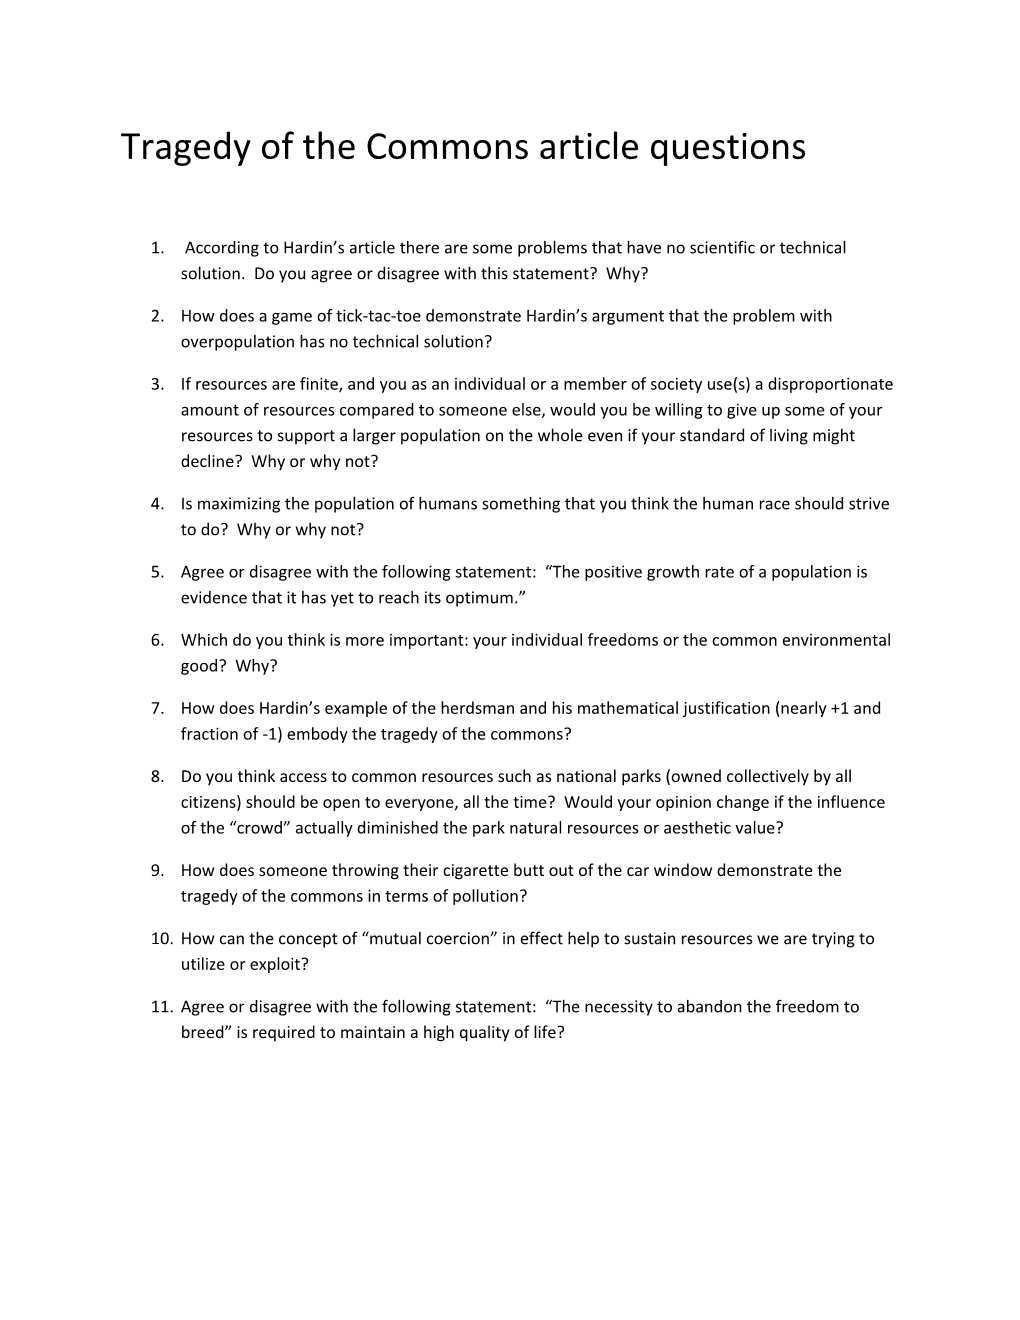 Tragedy of the Commons Article Questions